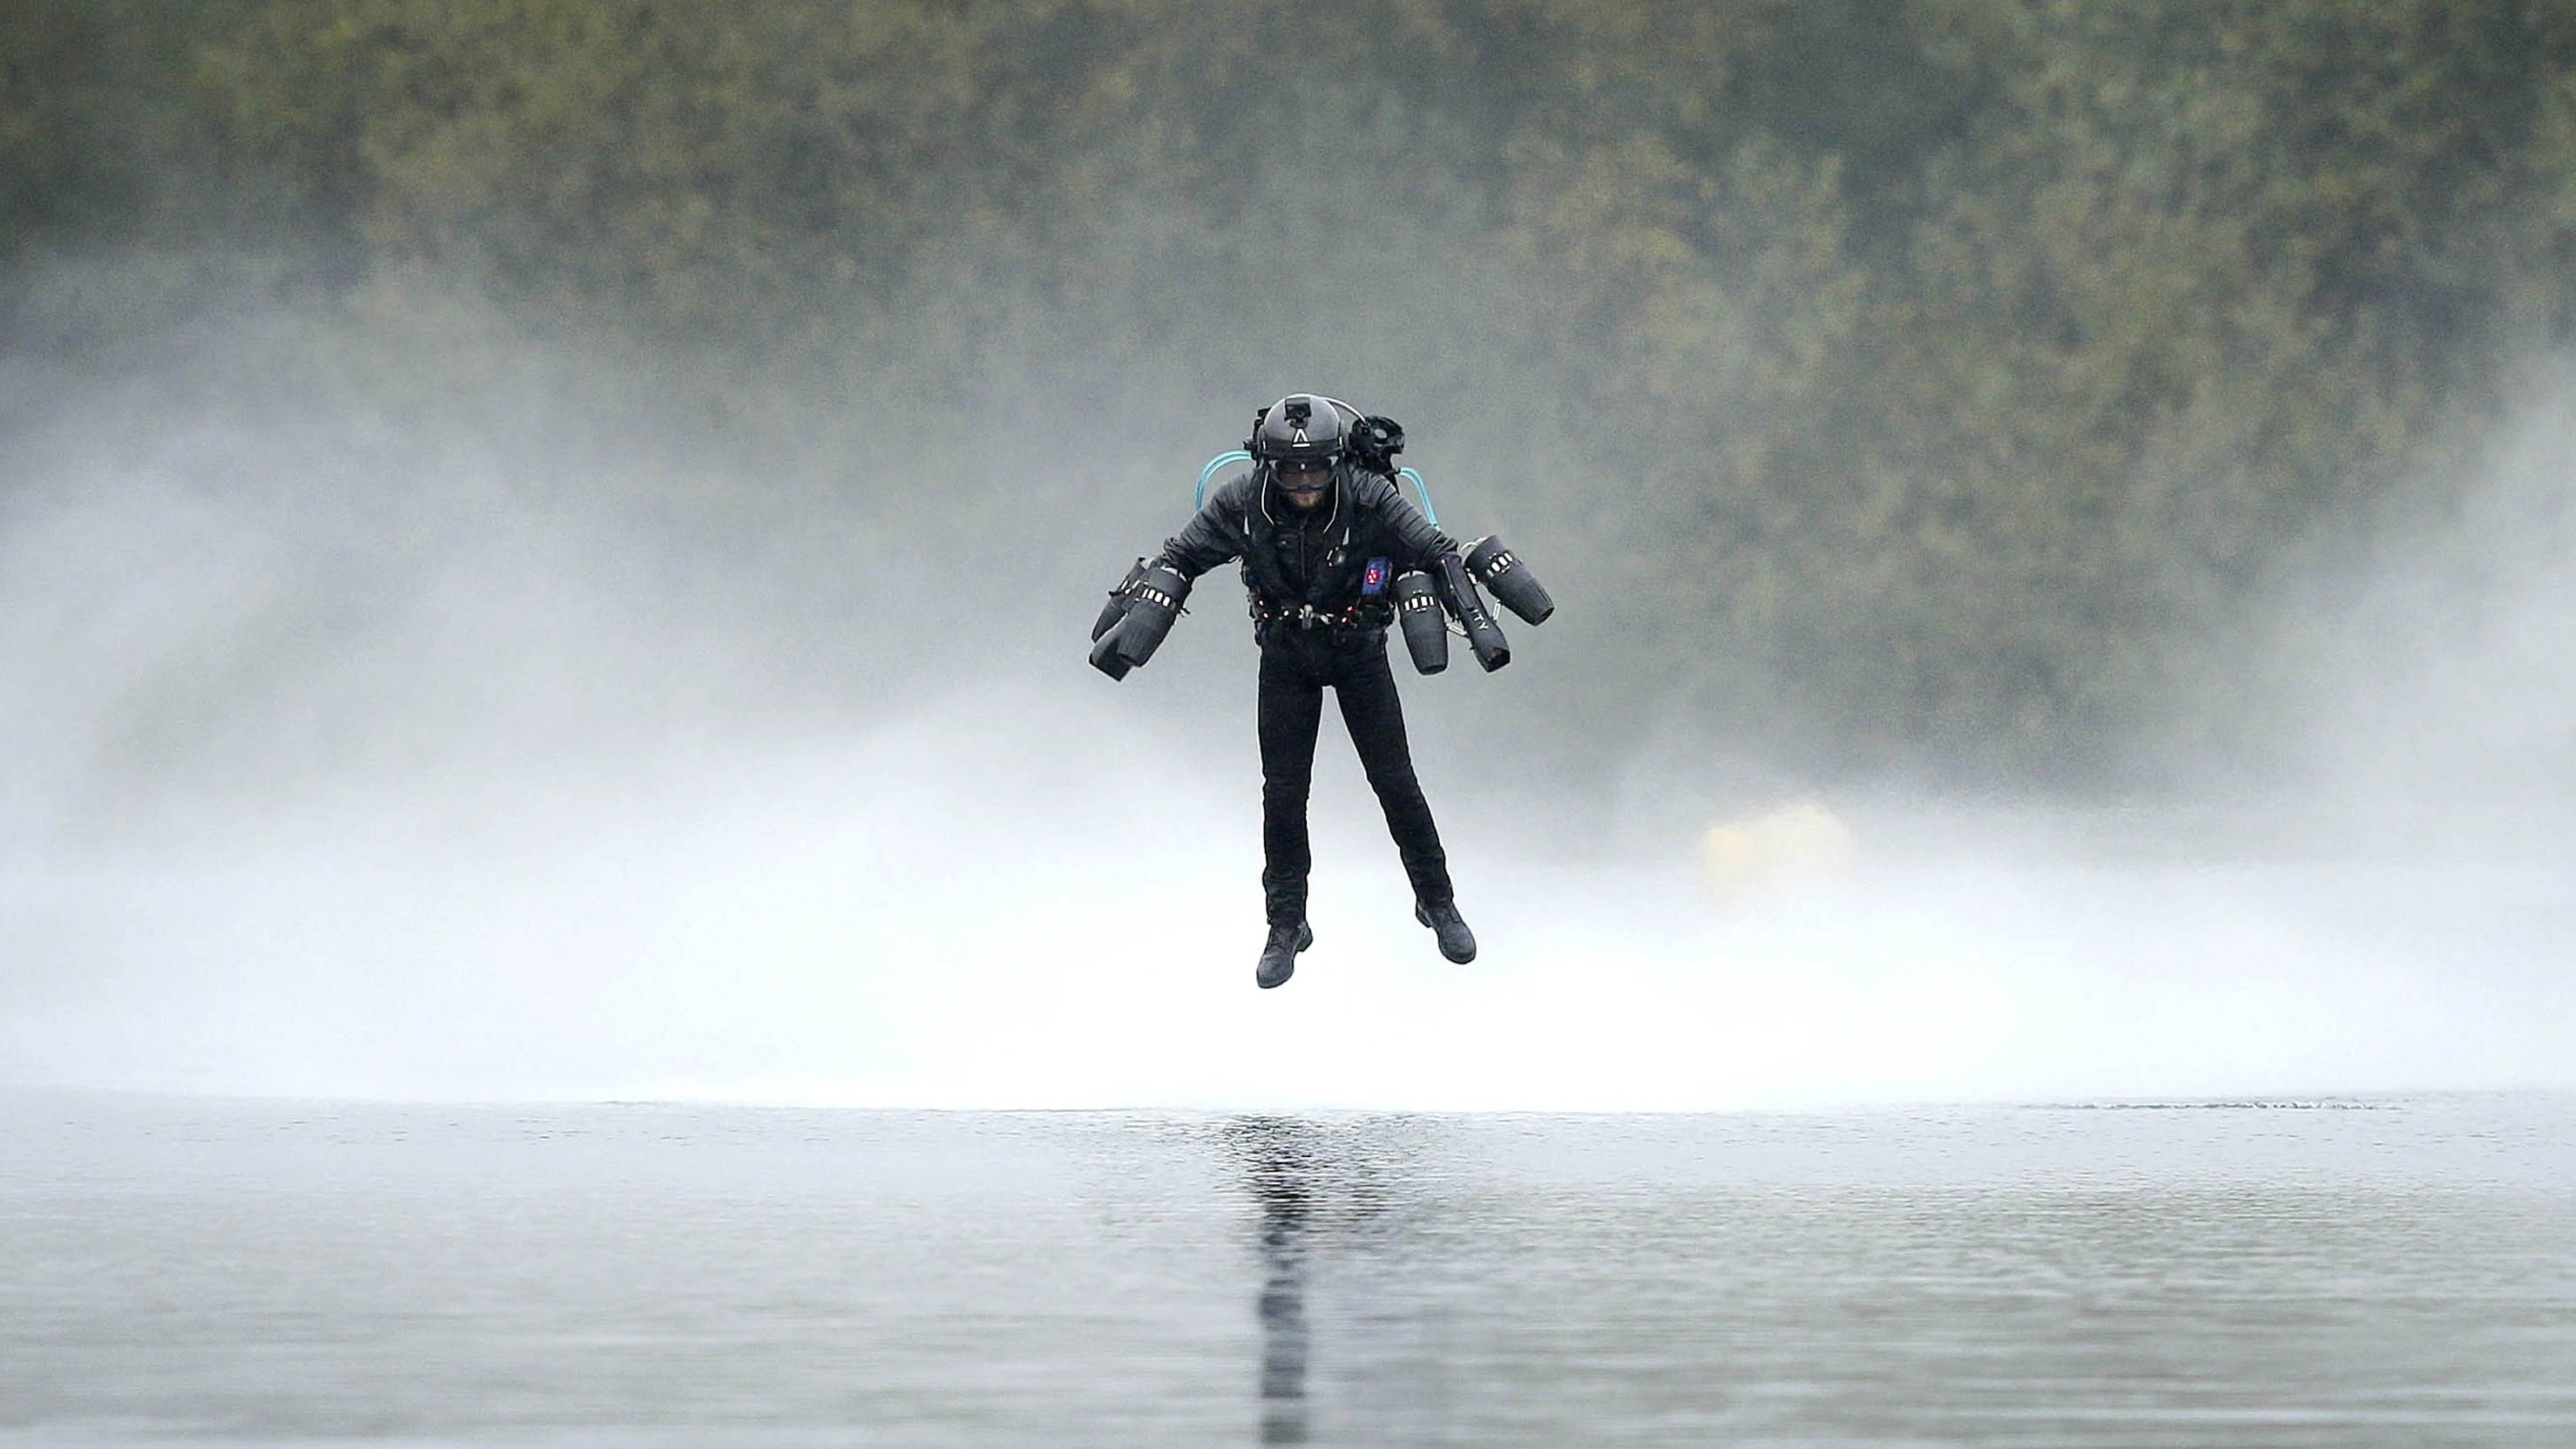 Richard Browning sets the Guinness World Record for the fastest speed in a body-controlled jet engine power suit (Matt Alexander/PA)